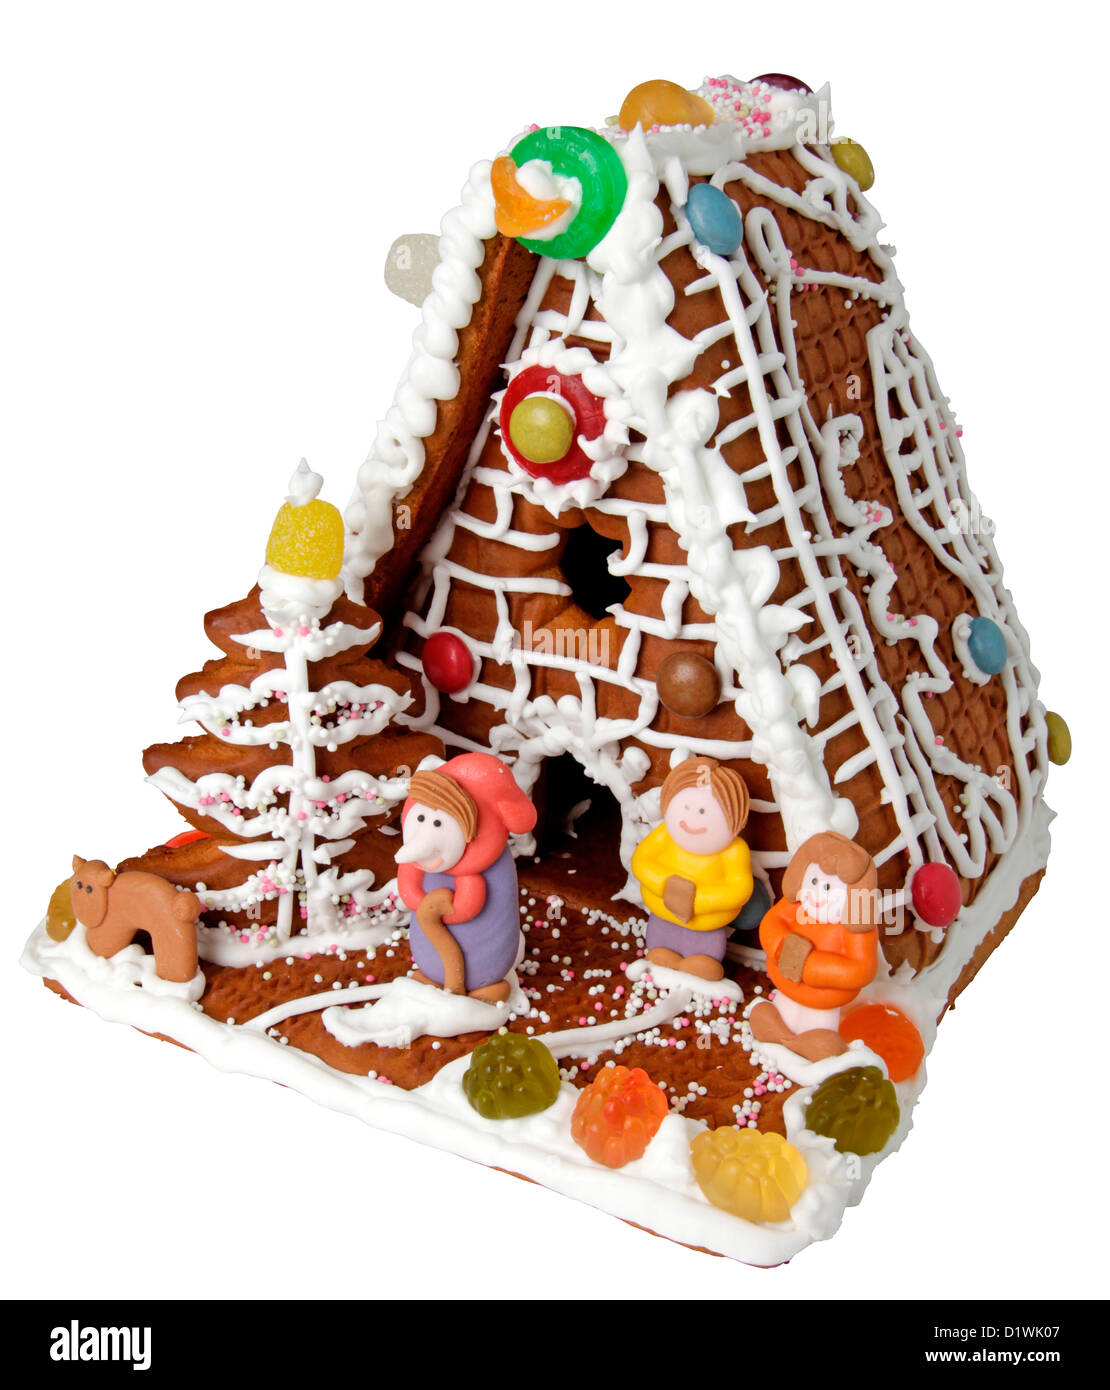 Candy house Cut Out Stock Images & Pictures - Alamy